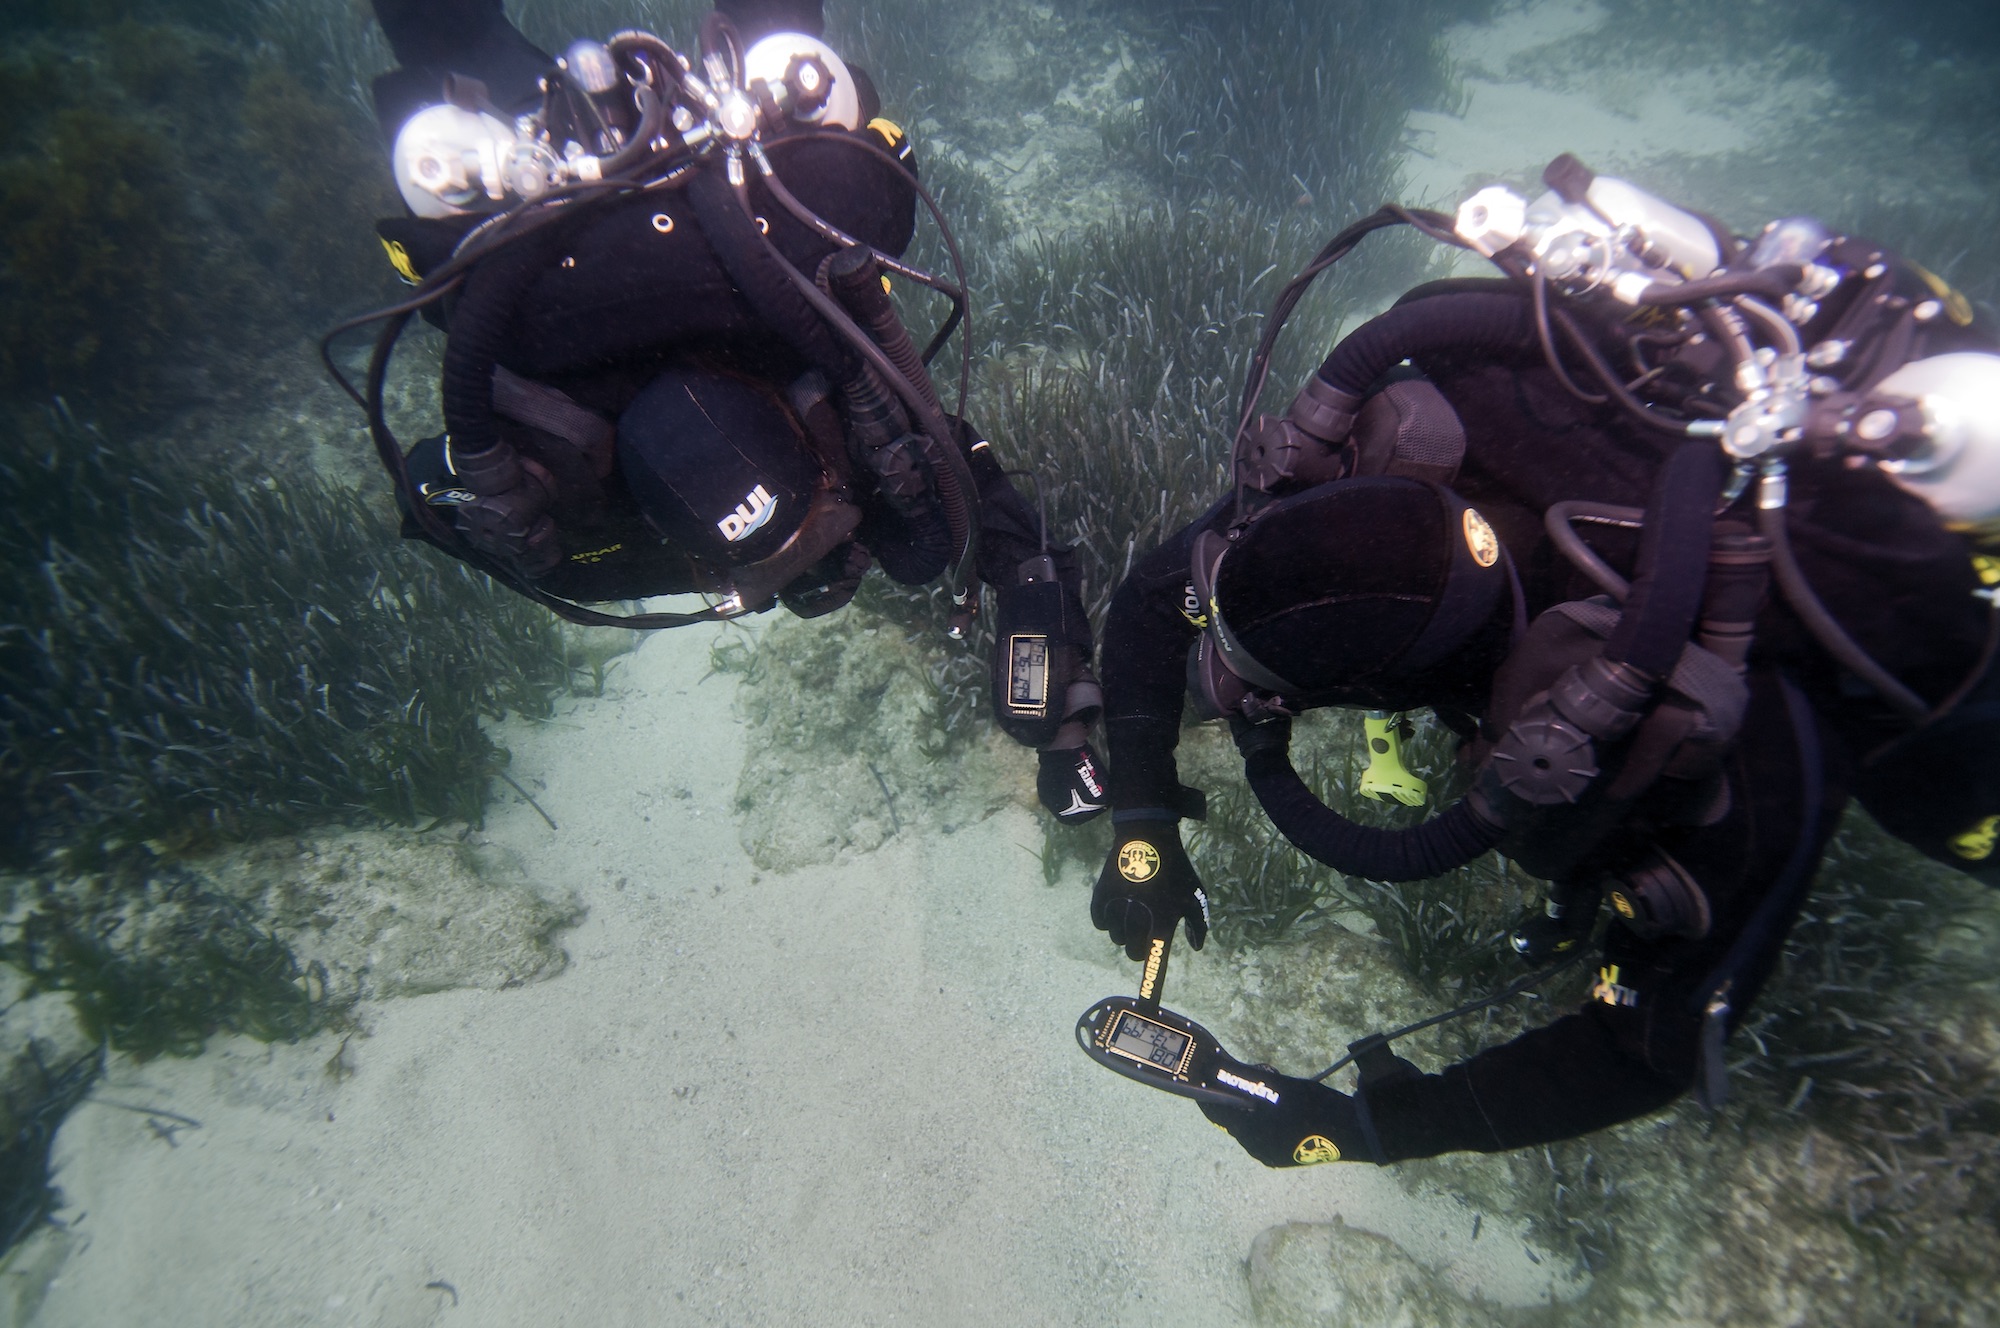 Rebreather divers over a bed of seagrass